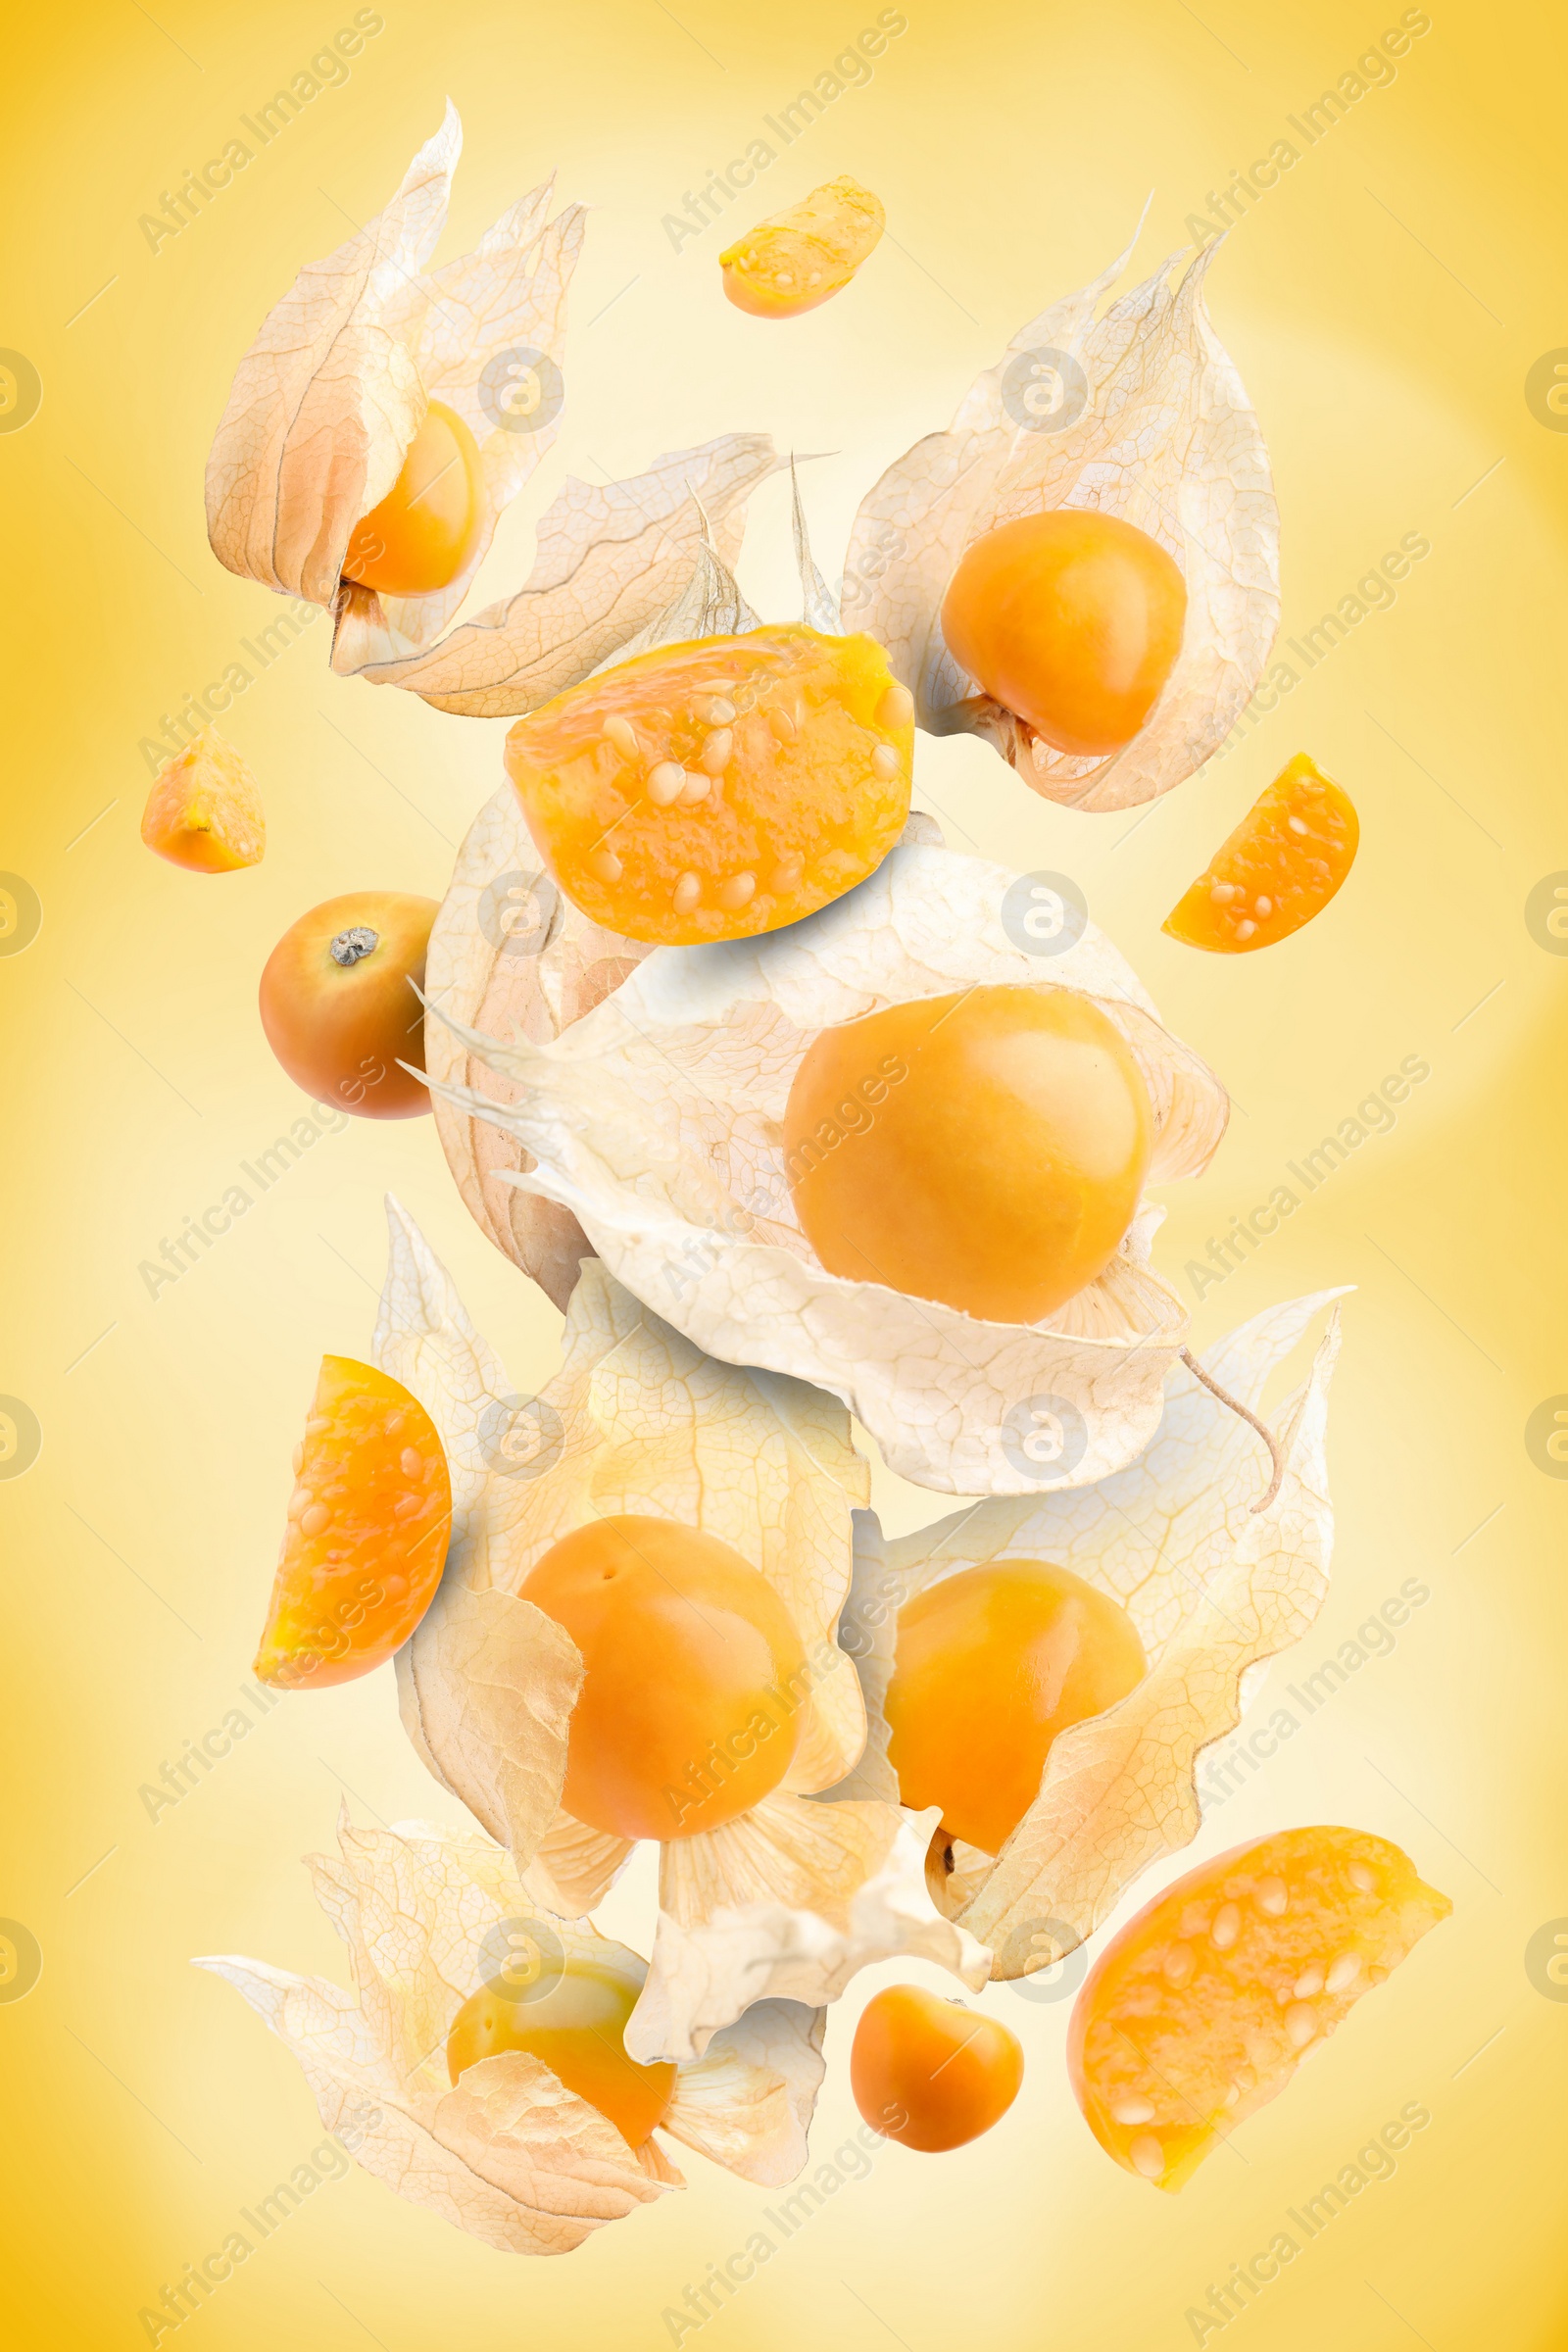 Image of Ripe orange physalis fruits with calyx falling on yellow gradient background